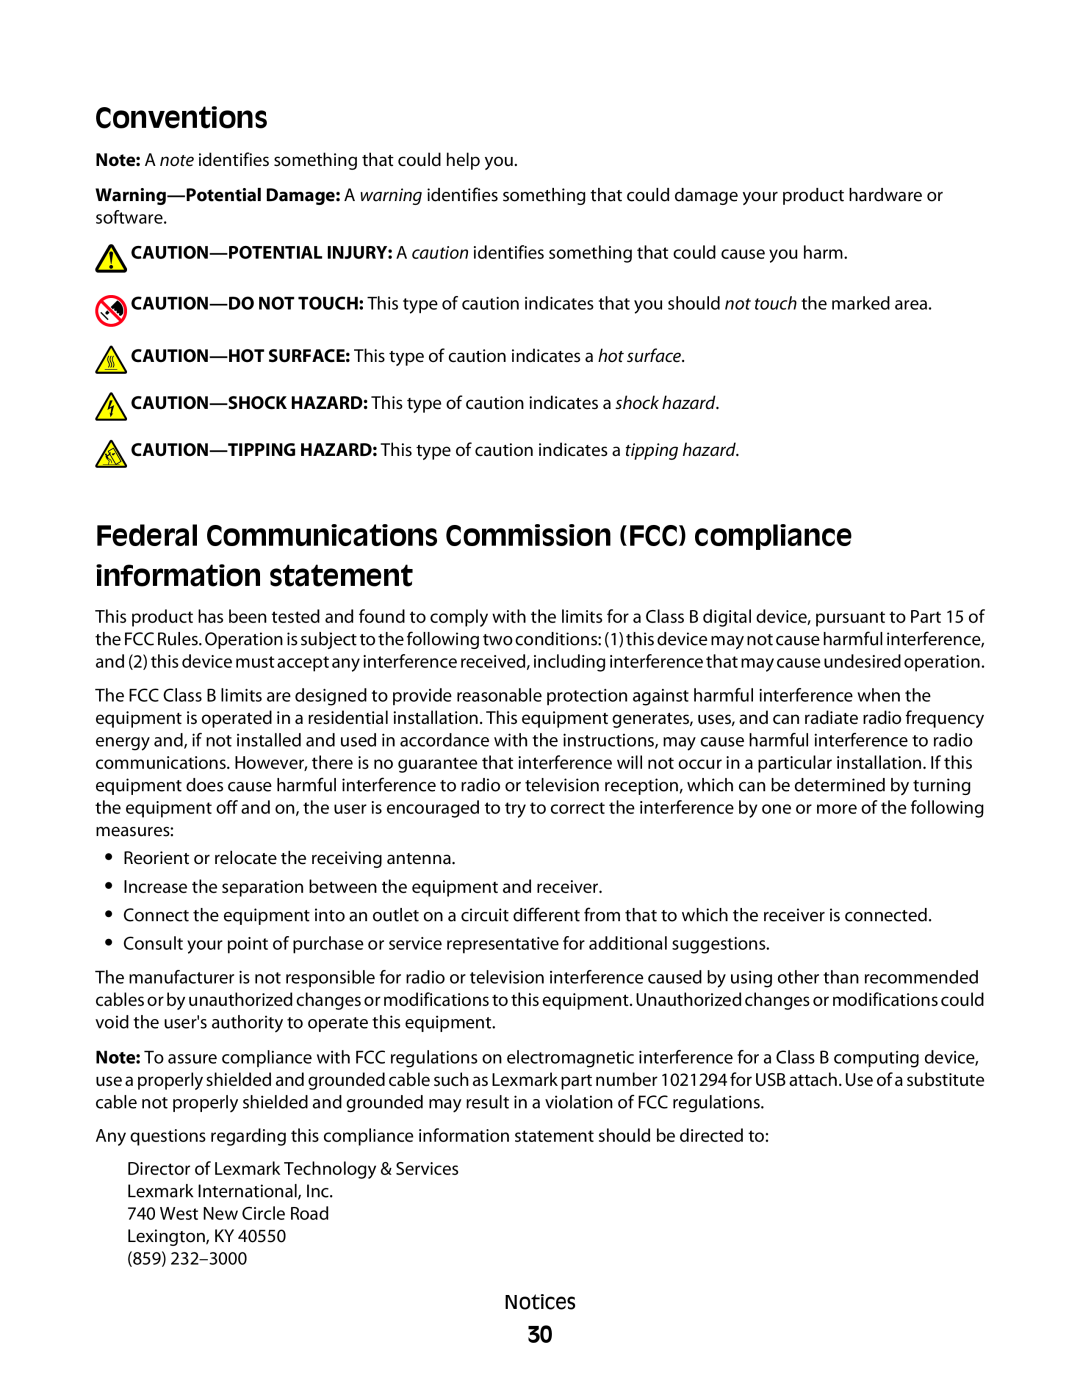 Lexmark P200 Series manual Conventions 